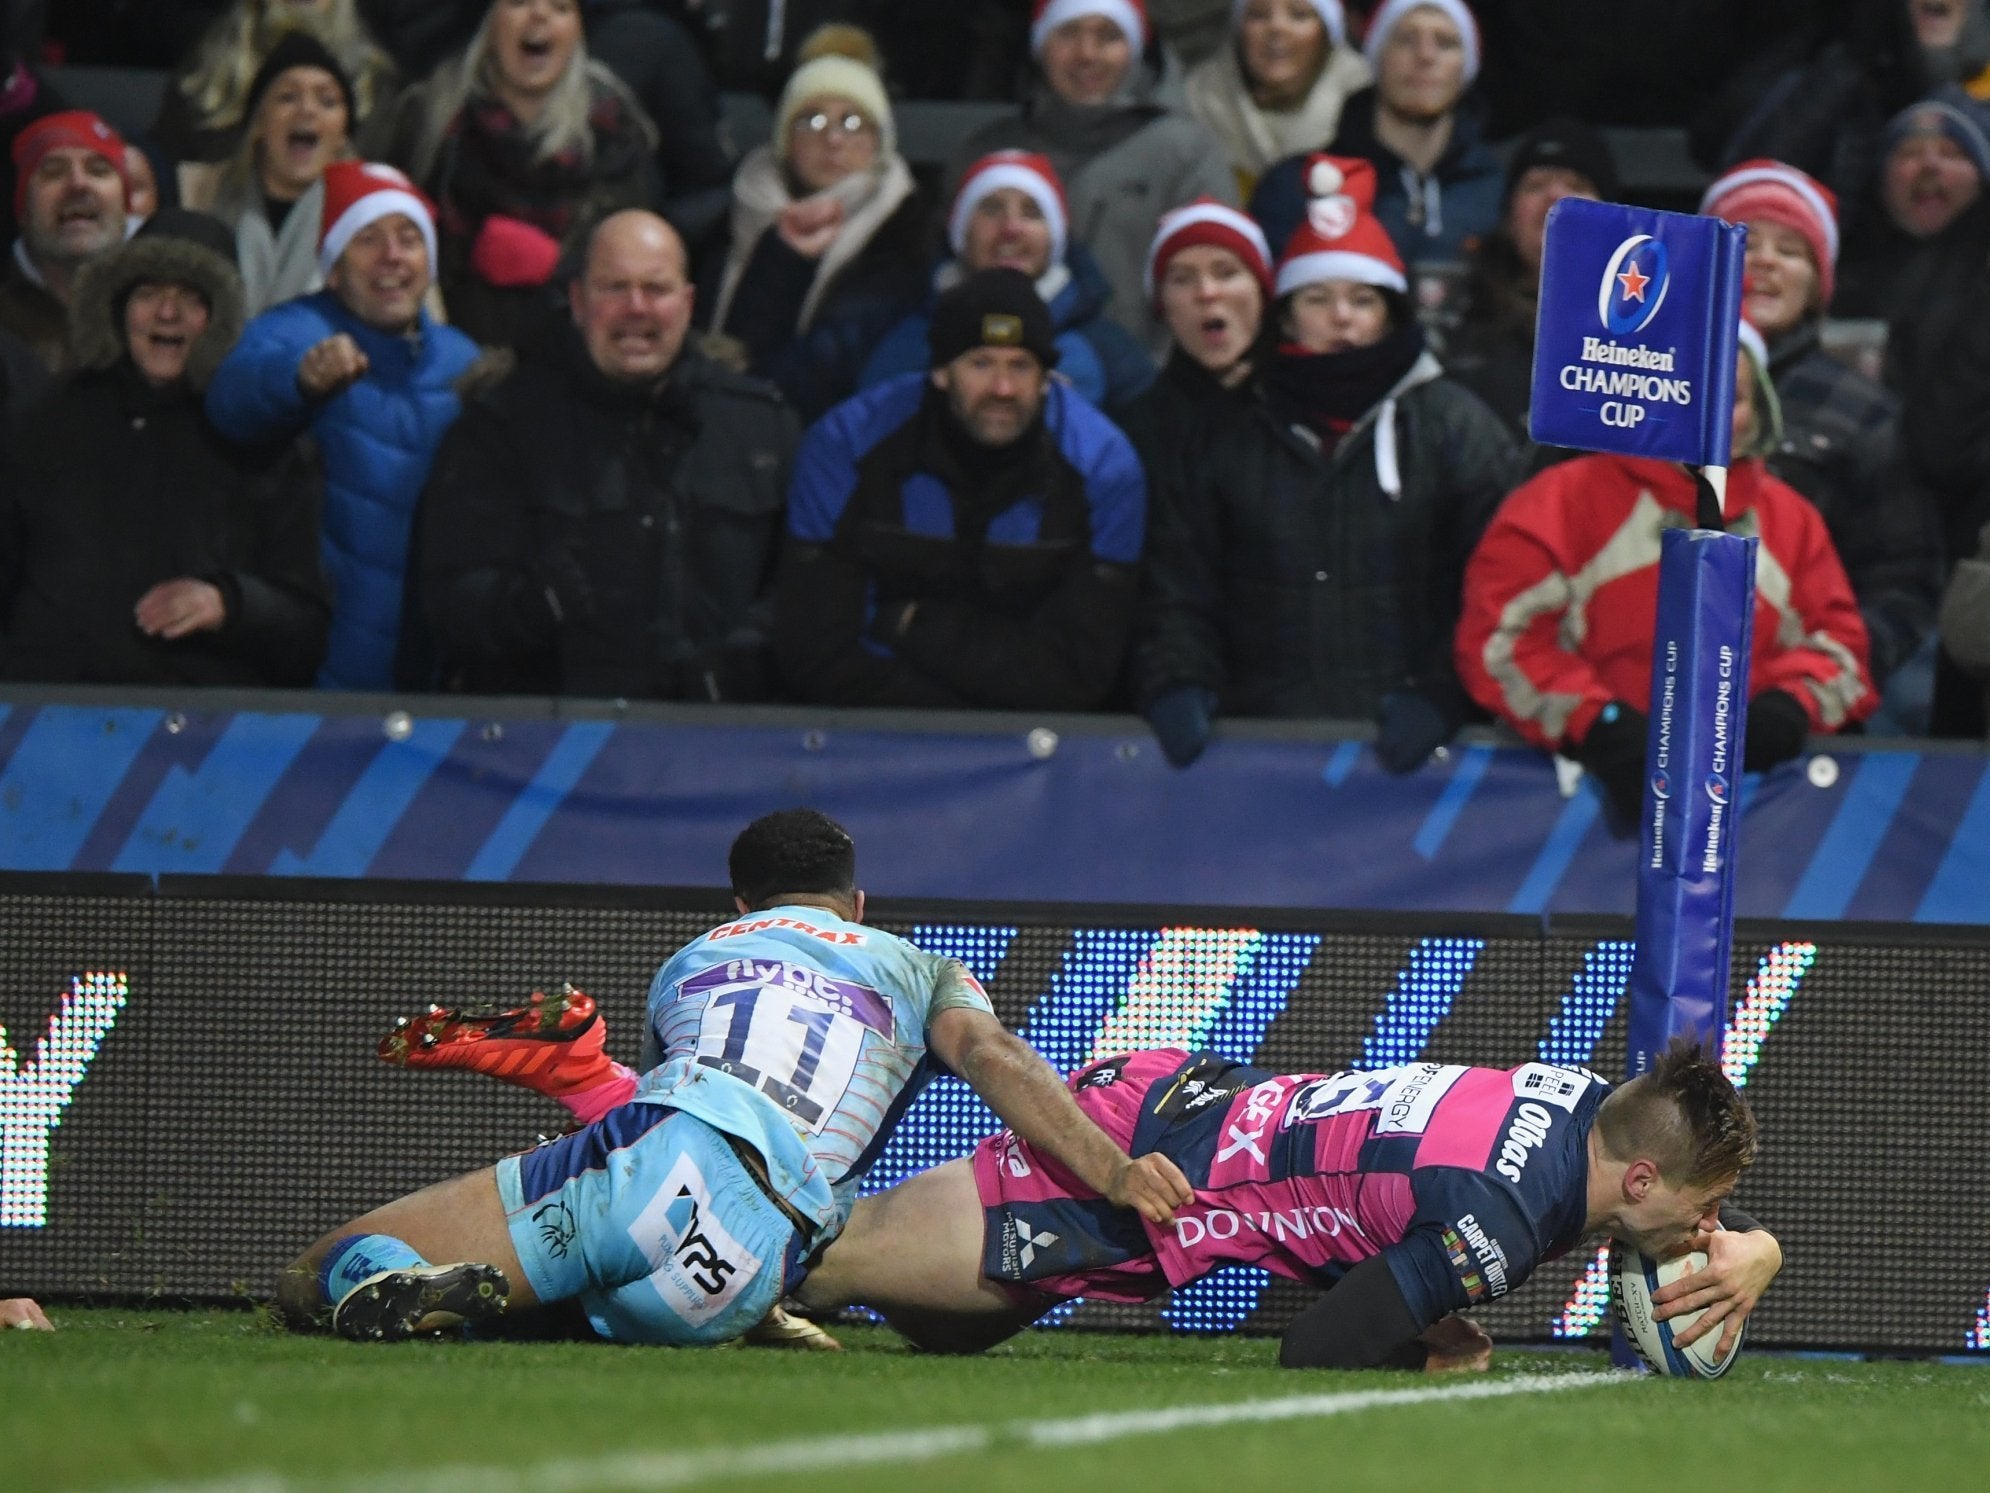 Jason Woodward's late try threatened a late fightback from Gloucester